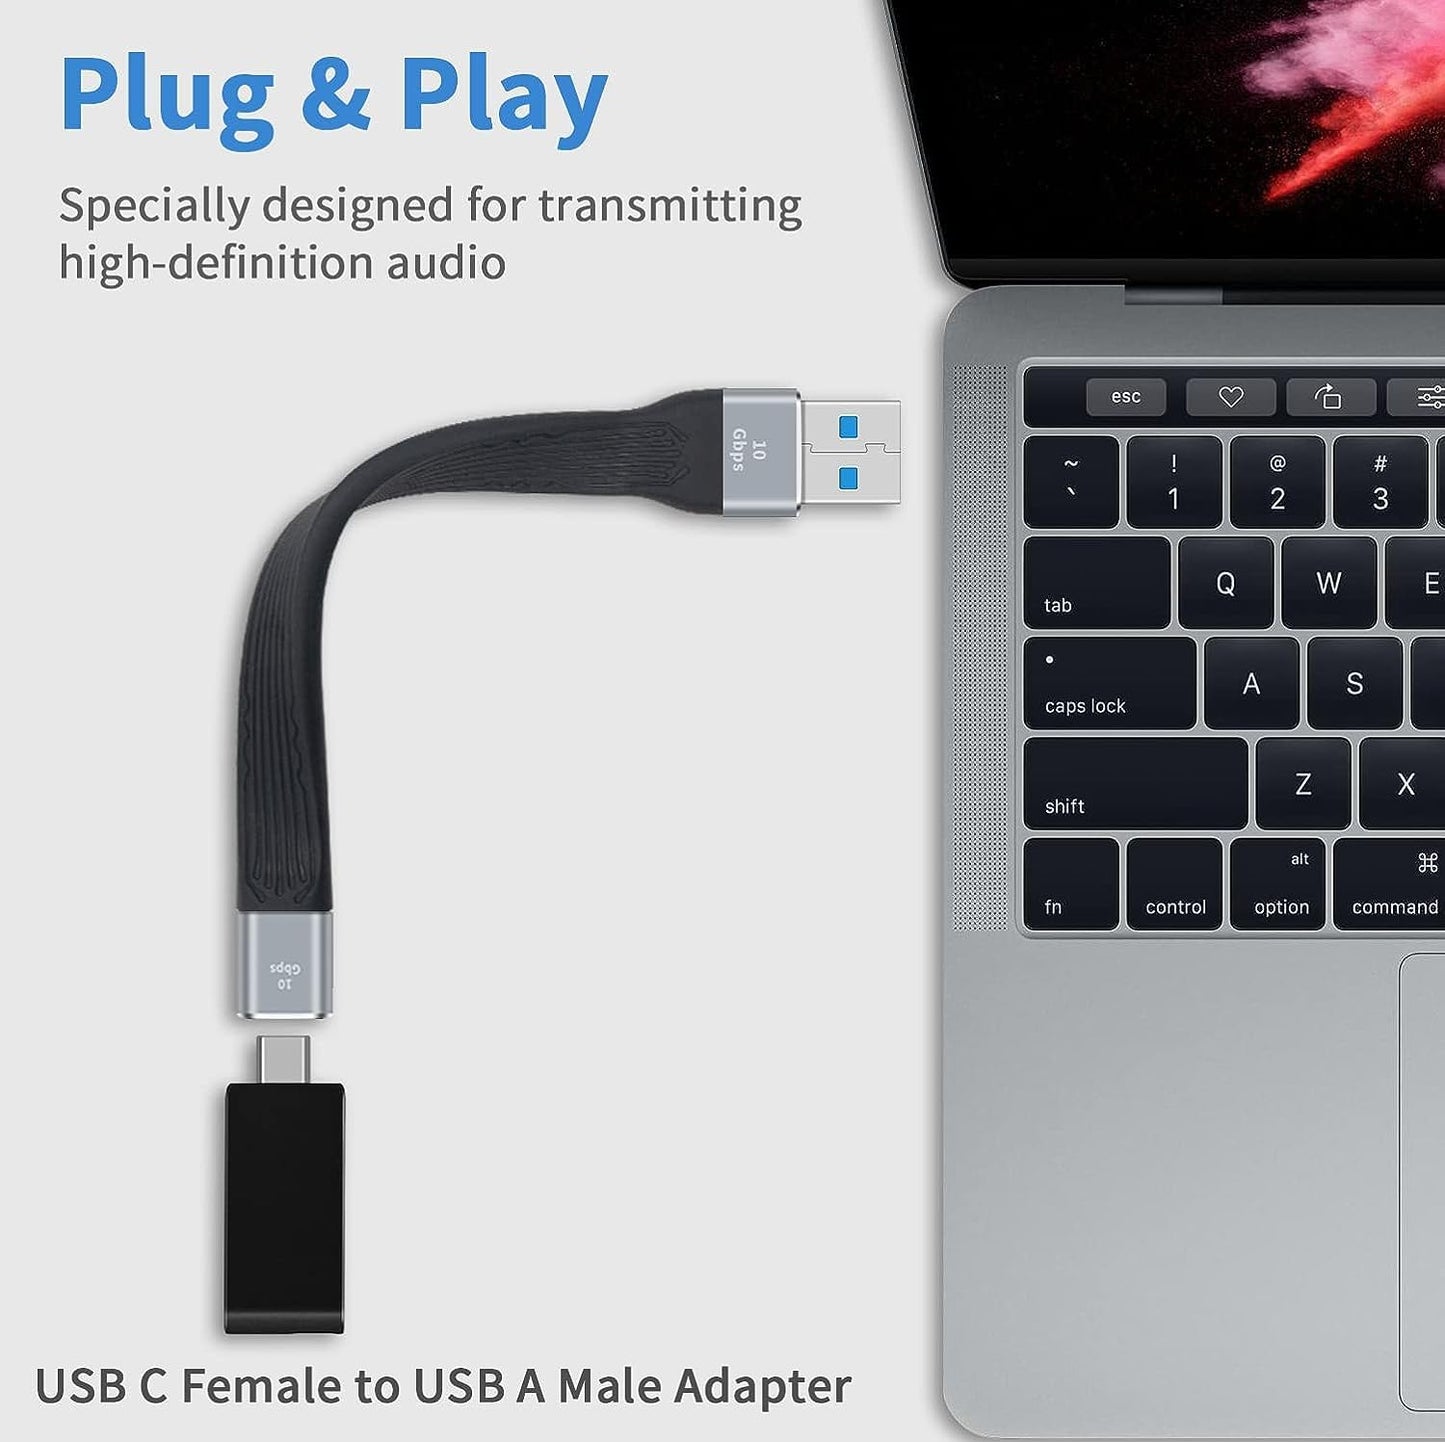 ADZOY USB-C to USB 3.1 Adapter 10Gbps，USB C Female to USB A Male Adapter Cable, USB C to USB A Adapter Charger Soft Flat Short Cable Compatible with Samsang Galaxy, MacBook(EPL-1033TC, 10GBPS)